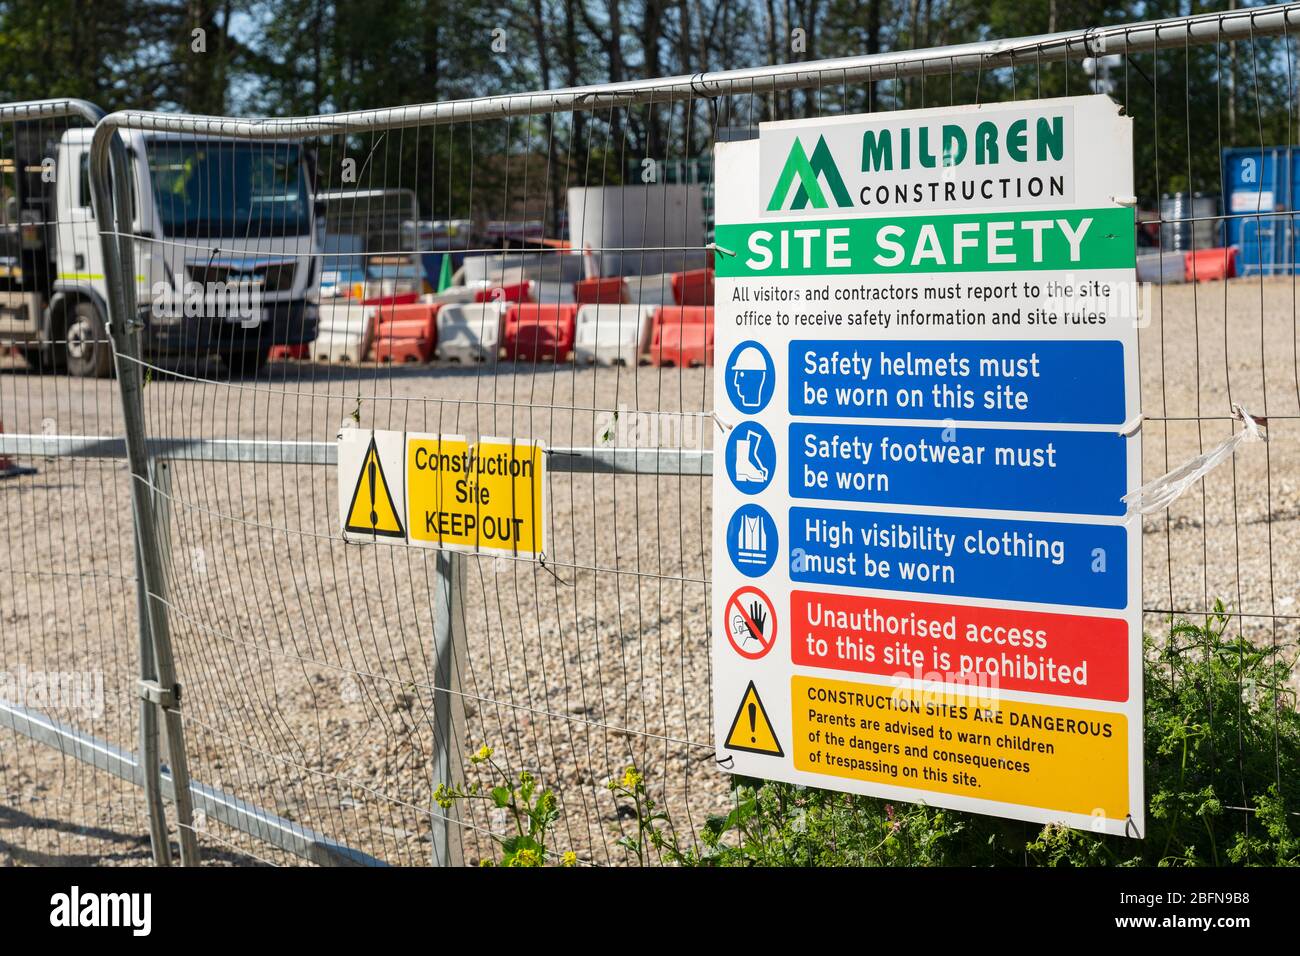 A site safety board on heras fencing at the entrance to a building site, empty with no construction work during the Covid 19 pandemic, April 2020, UK Stock Photo